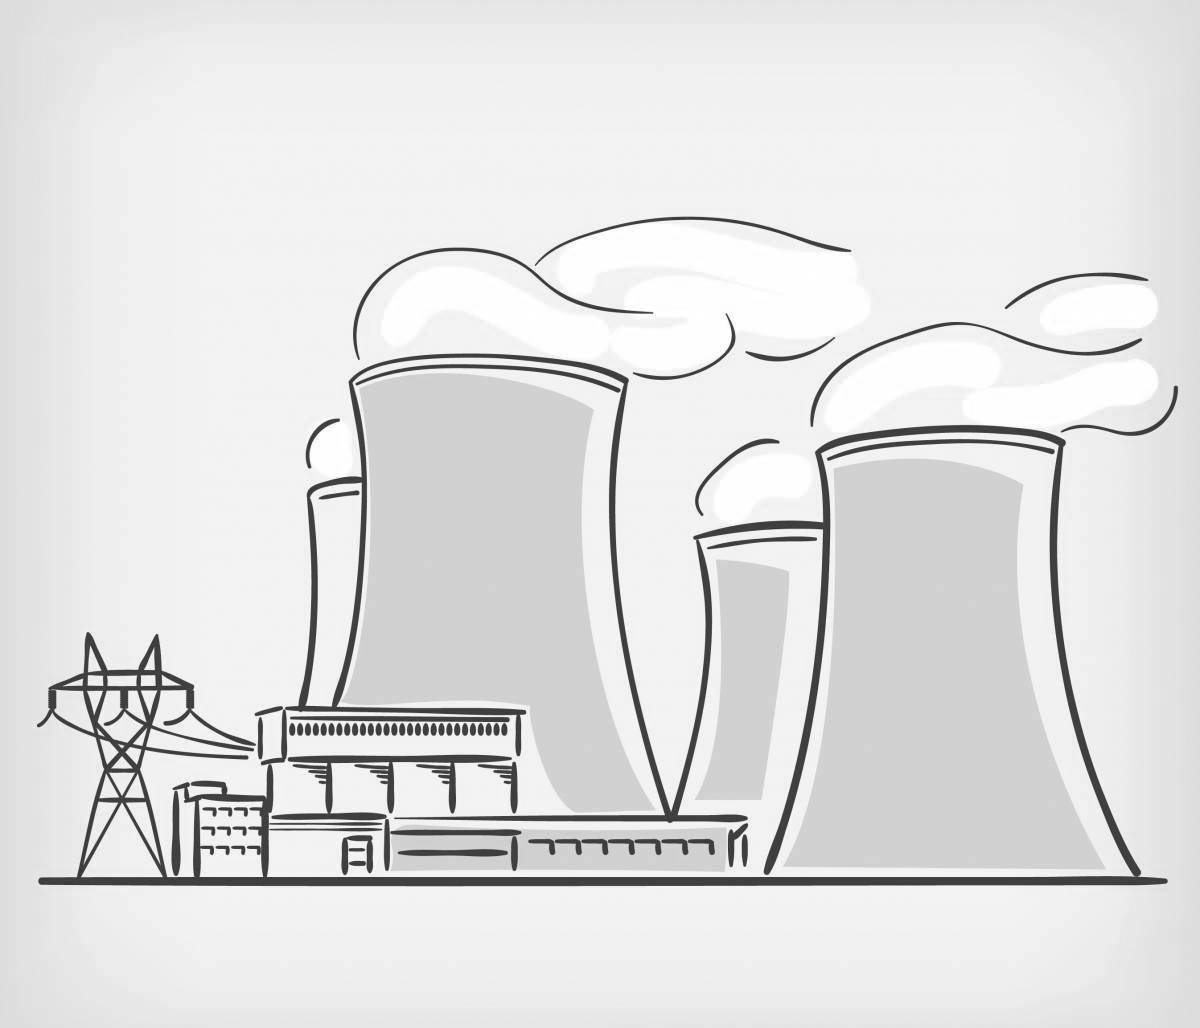 Fun coloring nuclear power plant